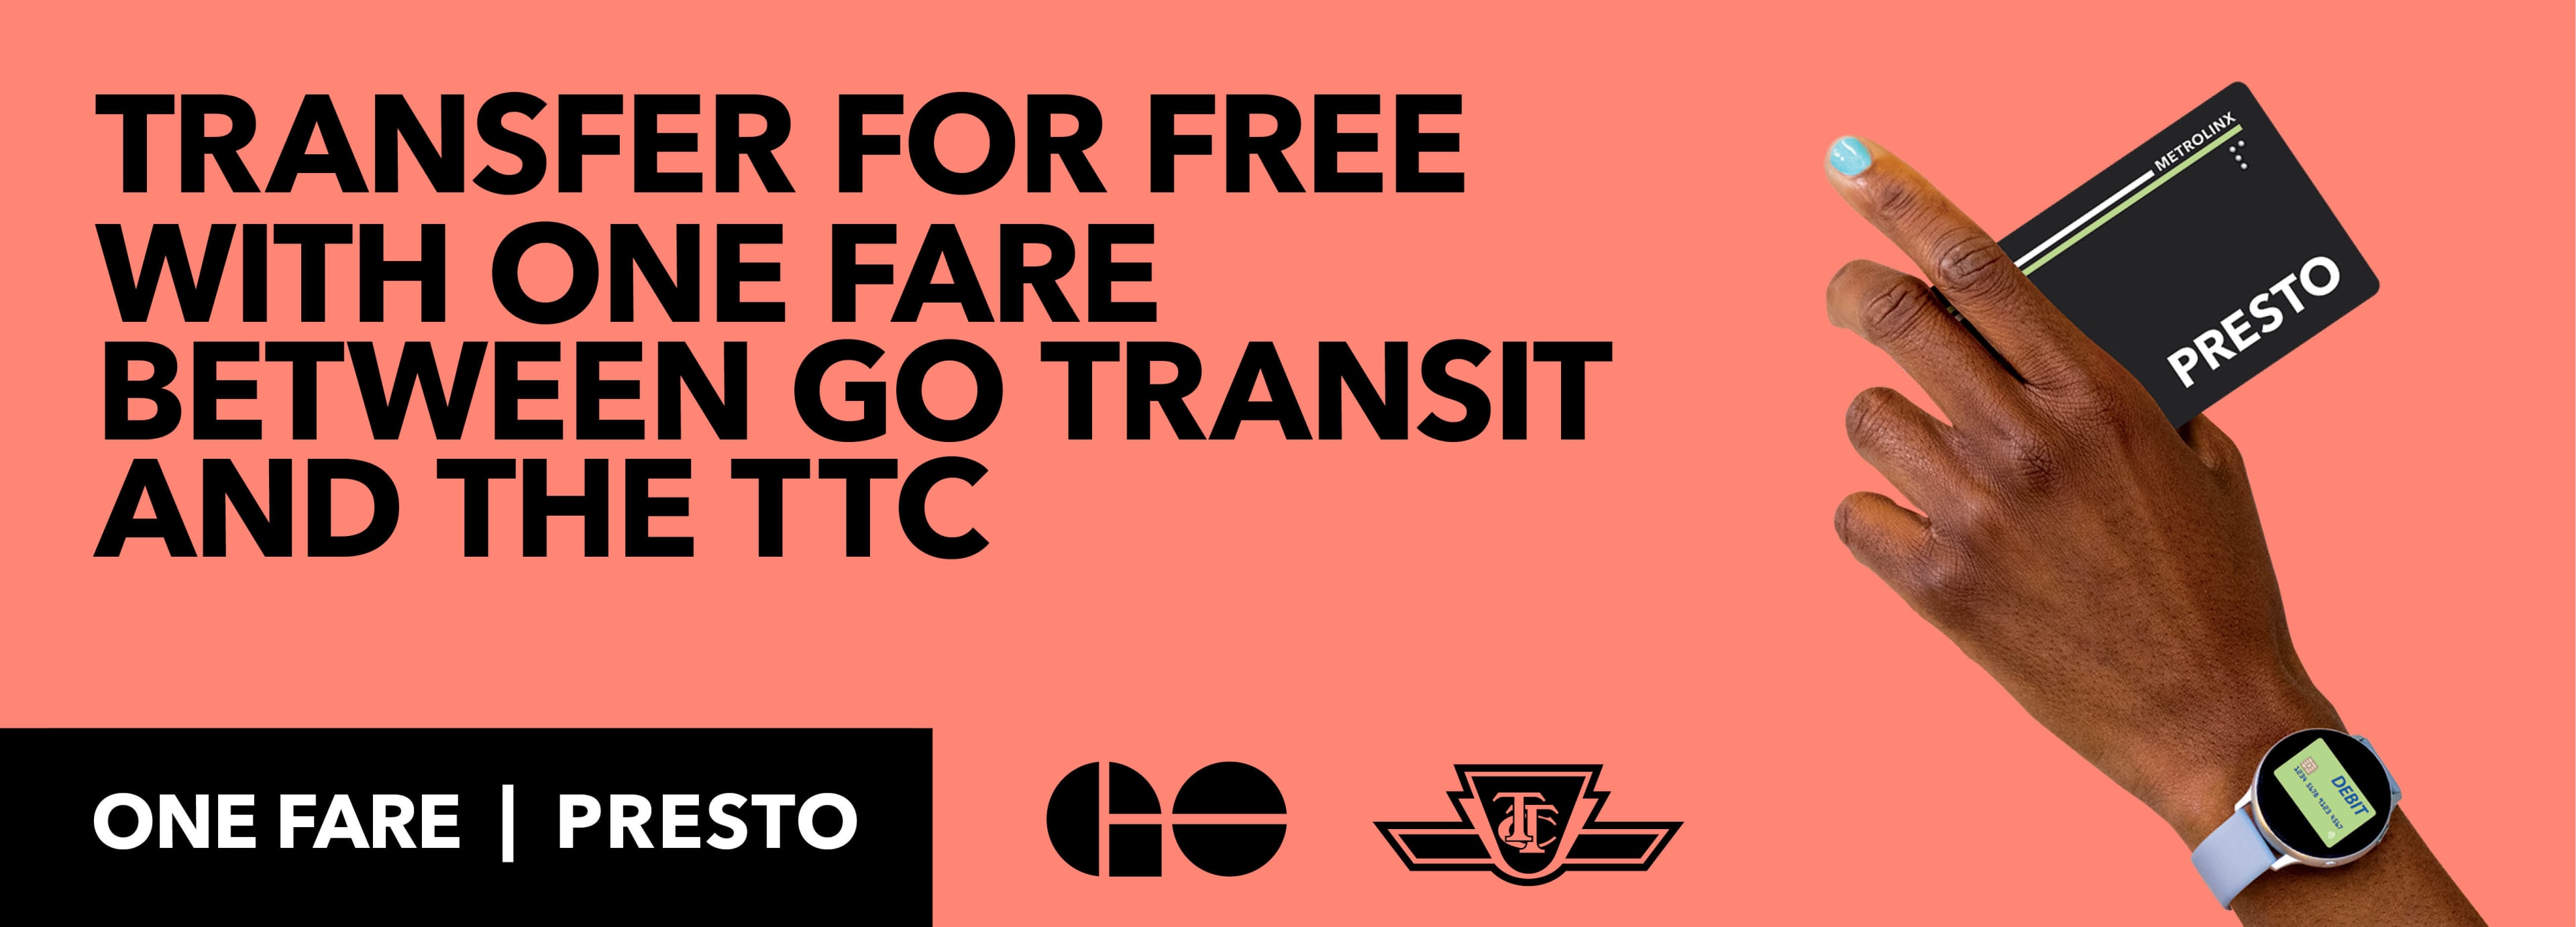 You can transfer for free when you travel between GO and TTC.